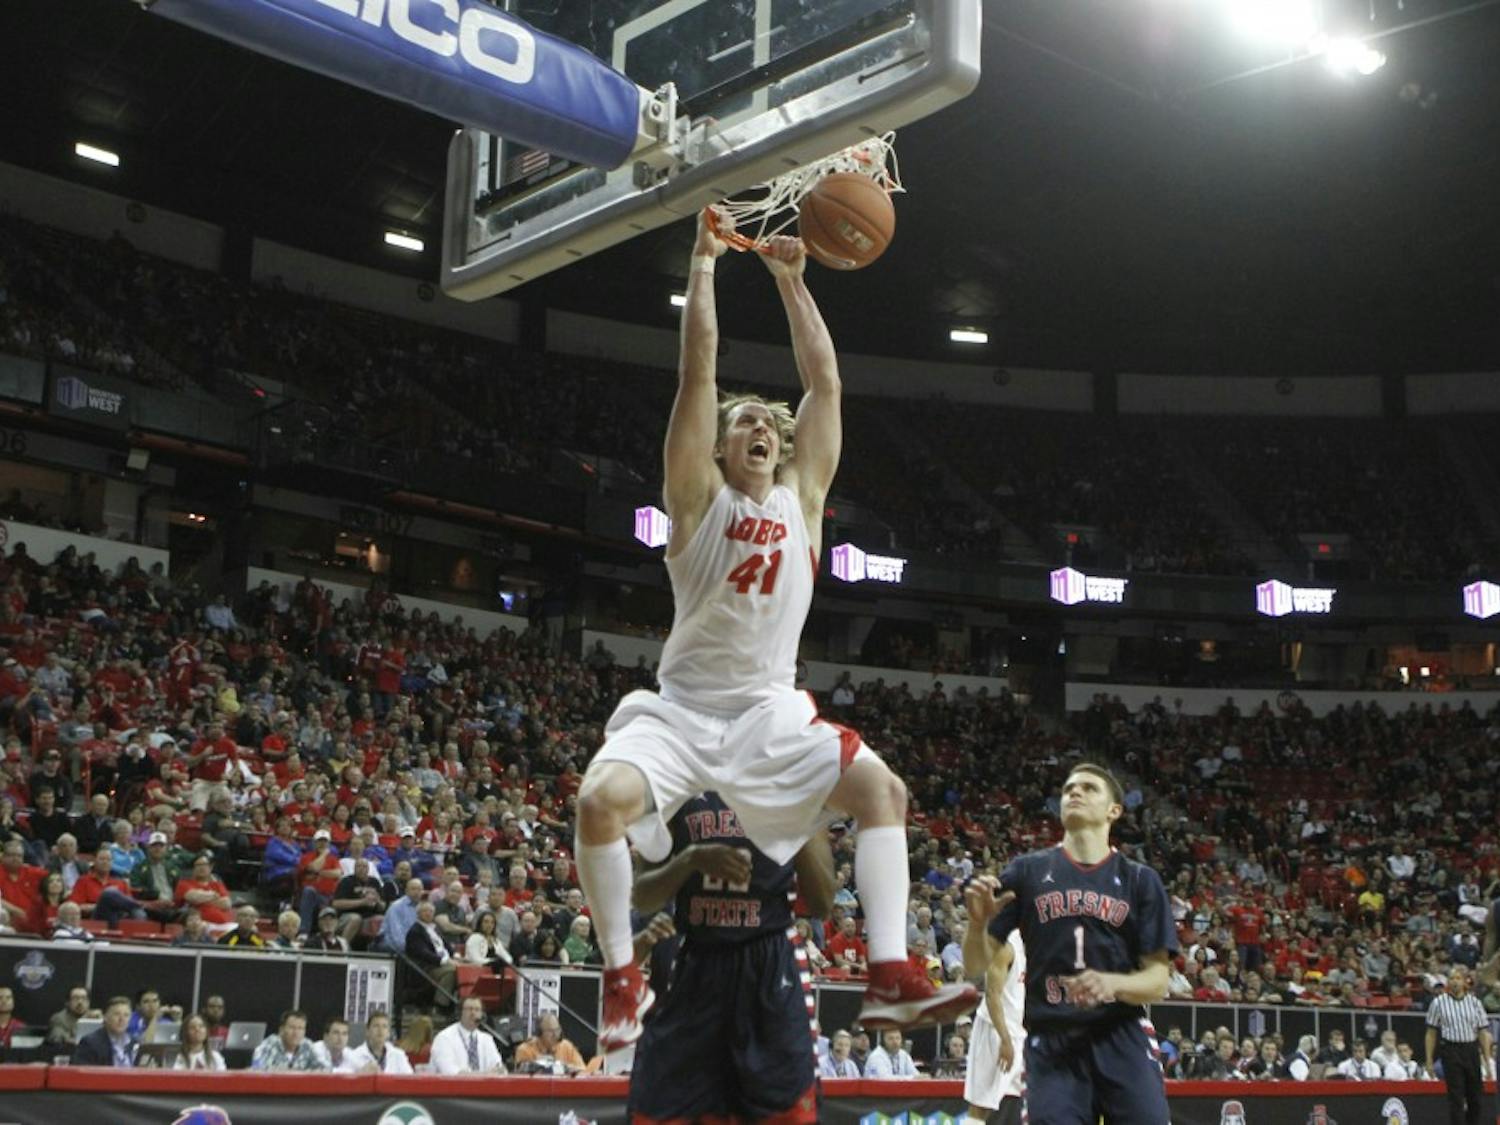 UNM vs Fresno State in the Mountain West Men's Basketball Championship Quarterfinals